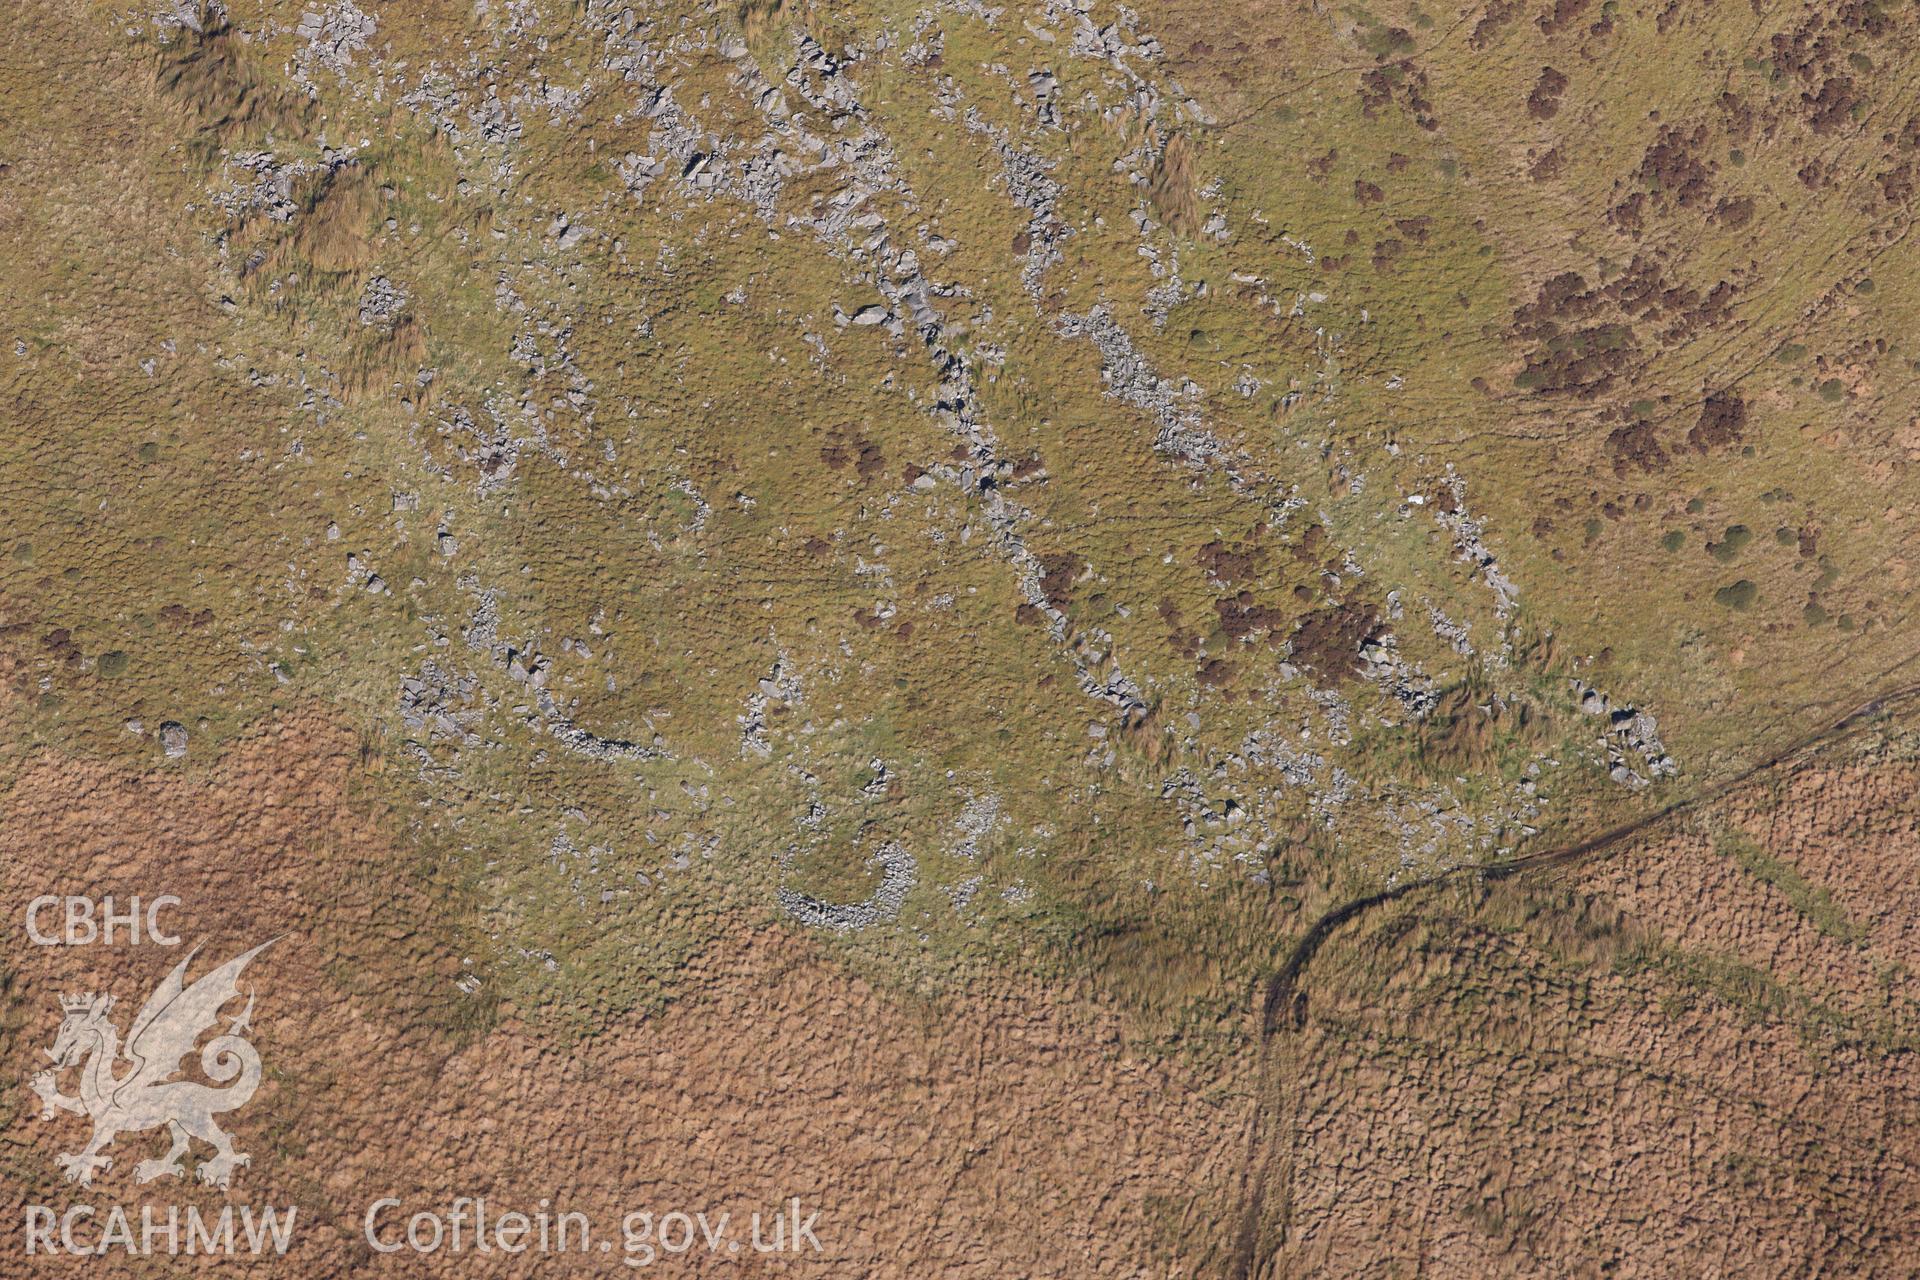 RCAHMW colour oblique photograph of Hut circle settlement below Foel Isaf. Taken by Toby Driver on 05/11/2012.